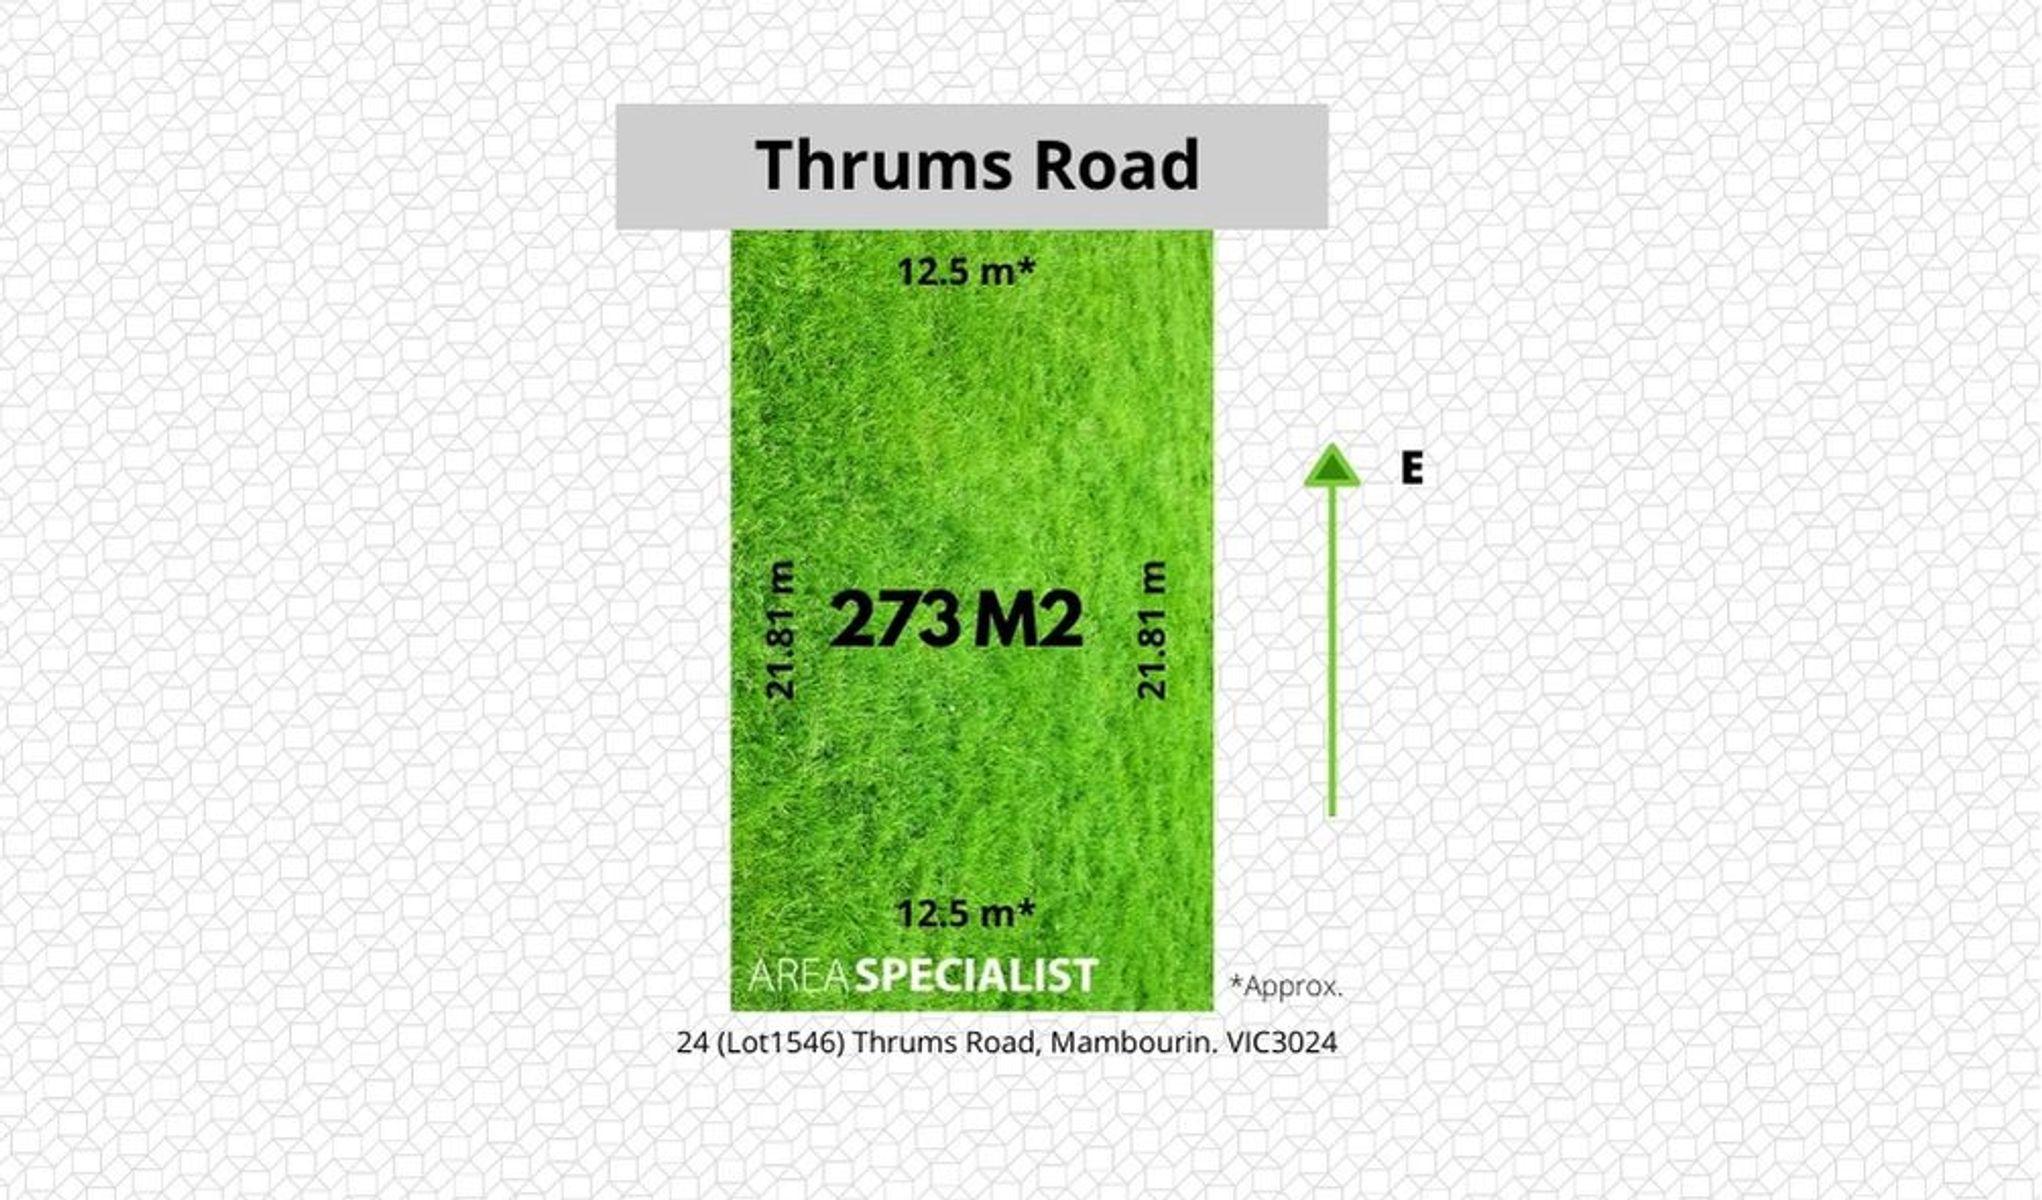 24 Lots1546Thrums Road, Mambourin